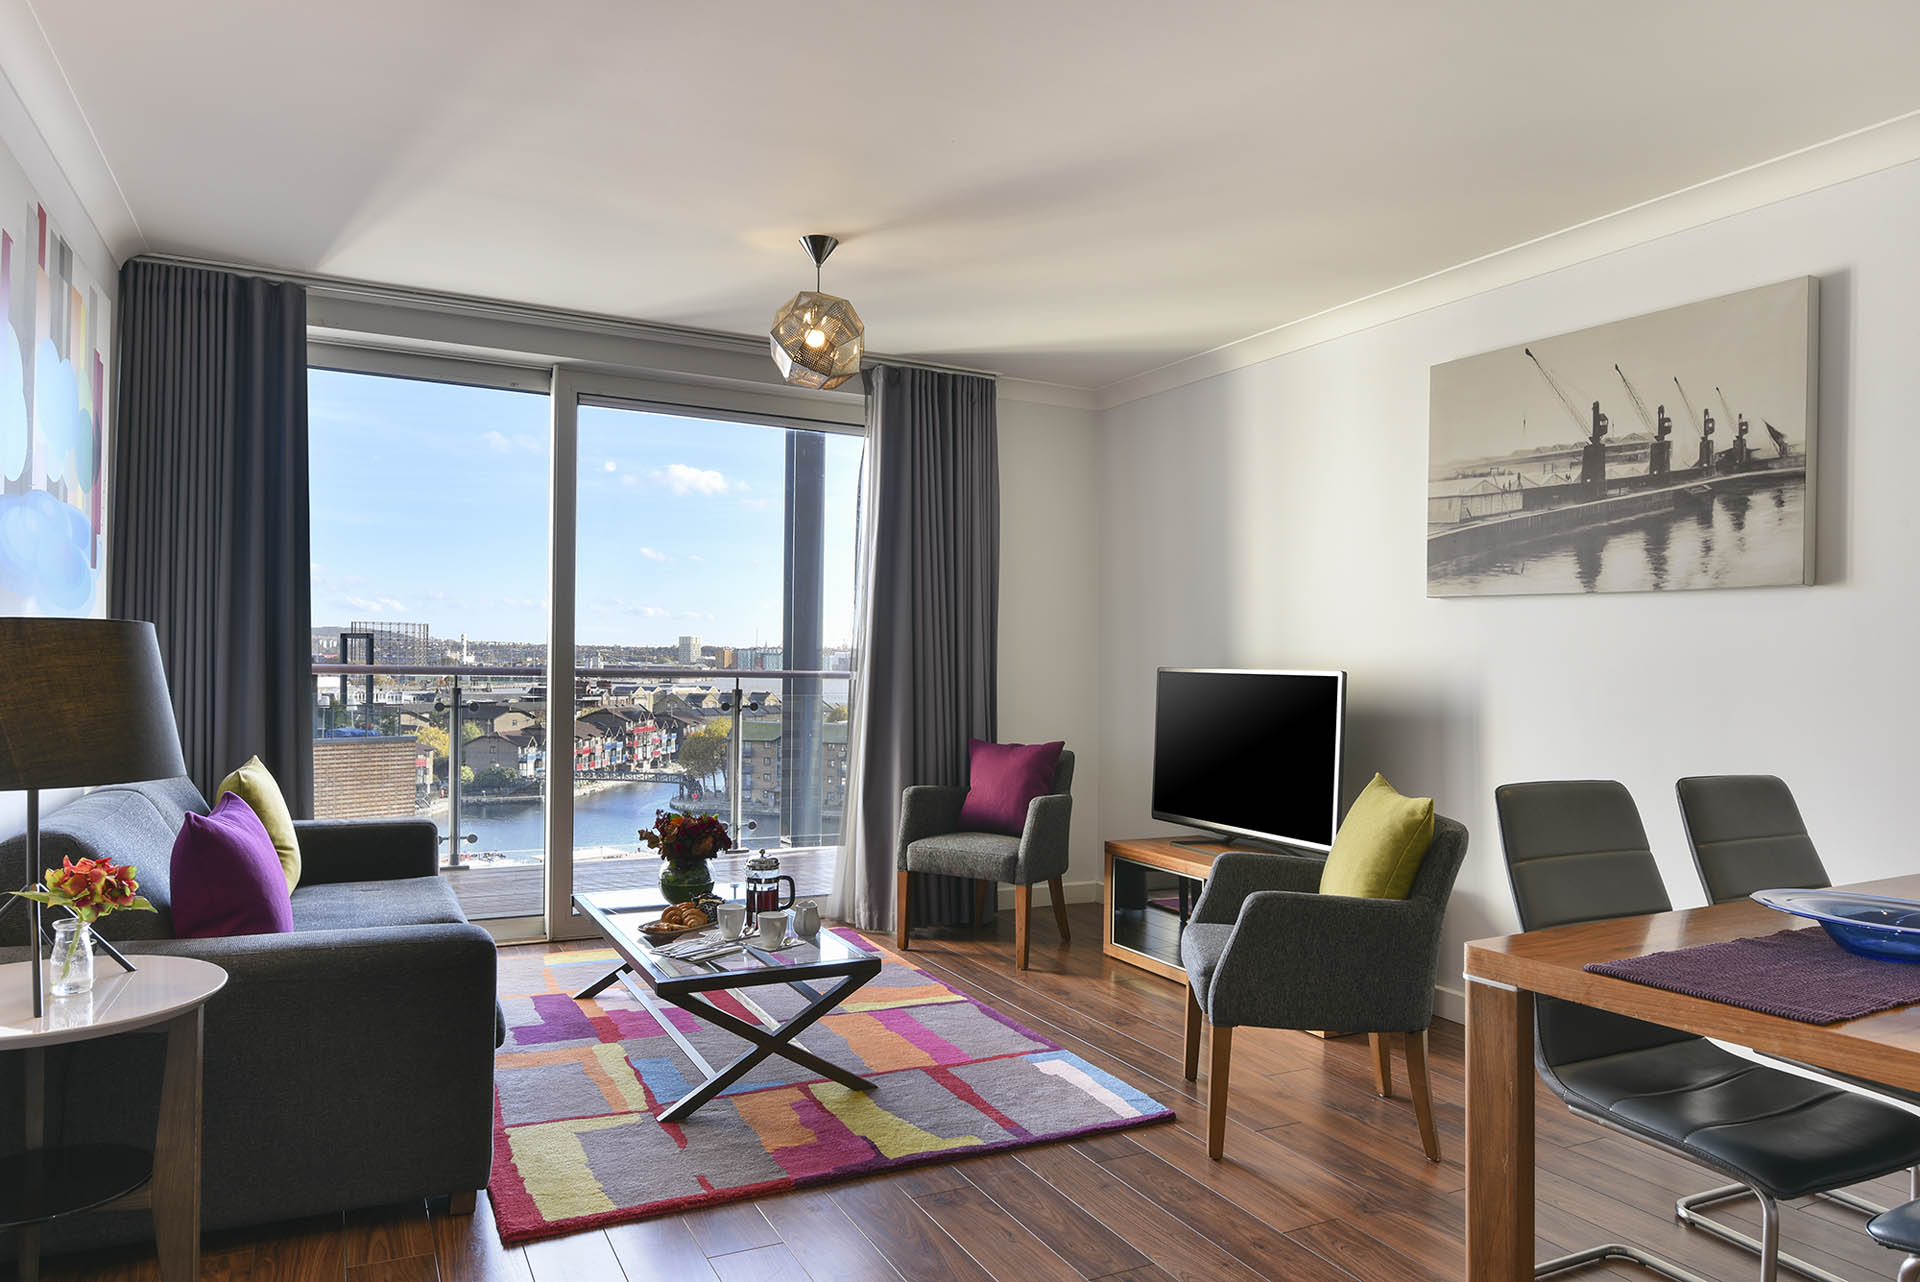 Overview of canary wharf flats to rent in east london